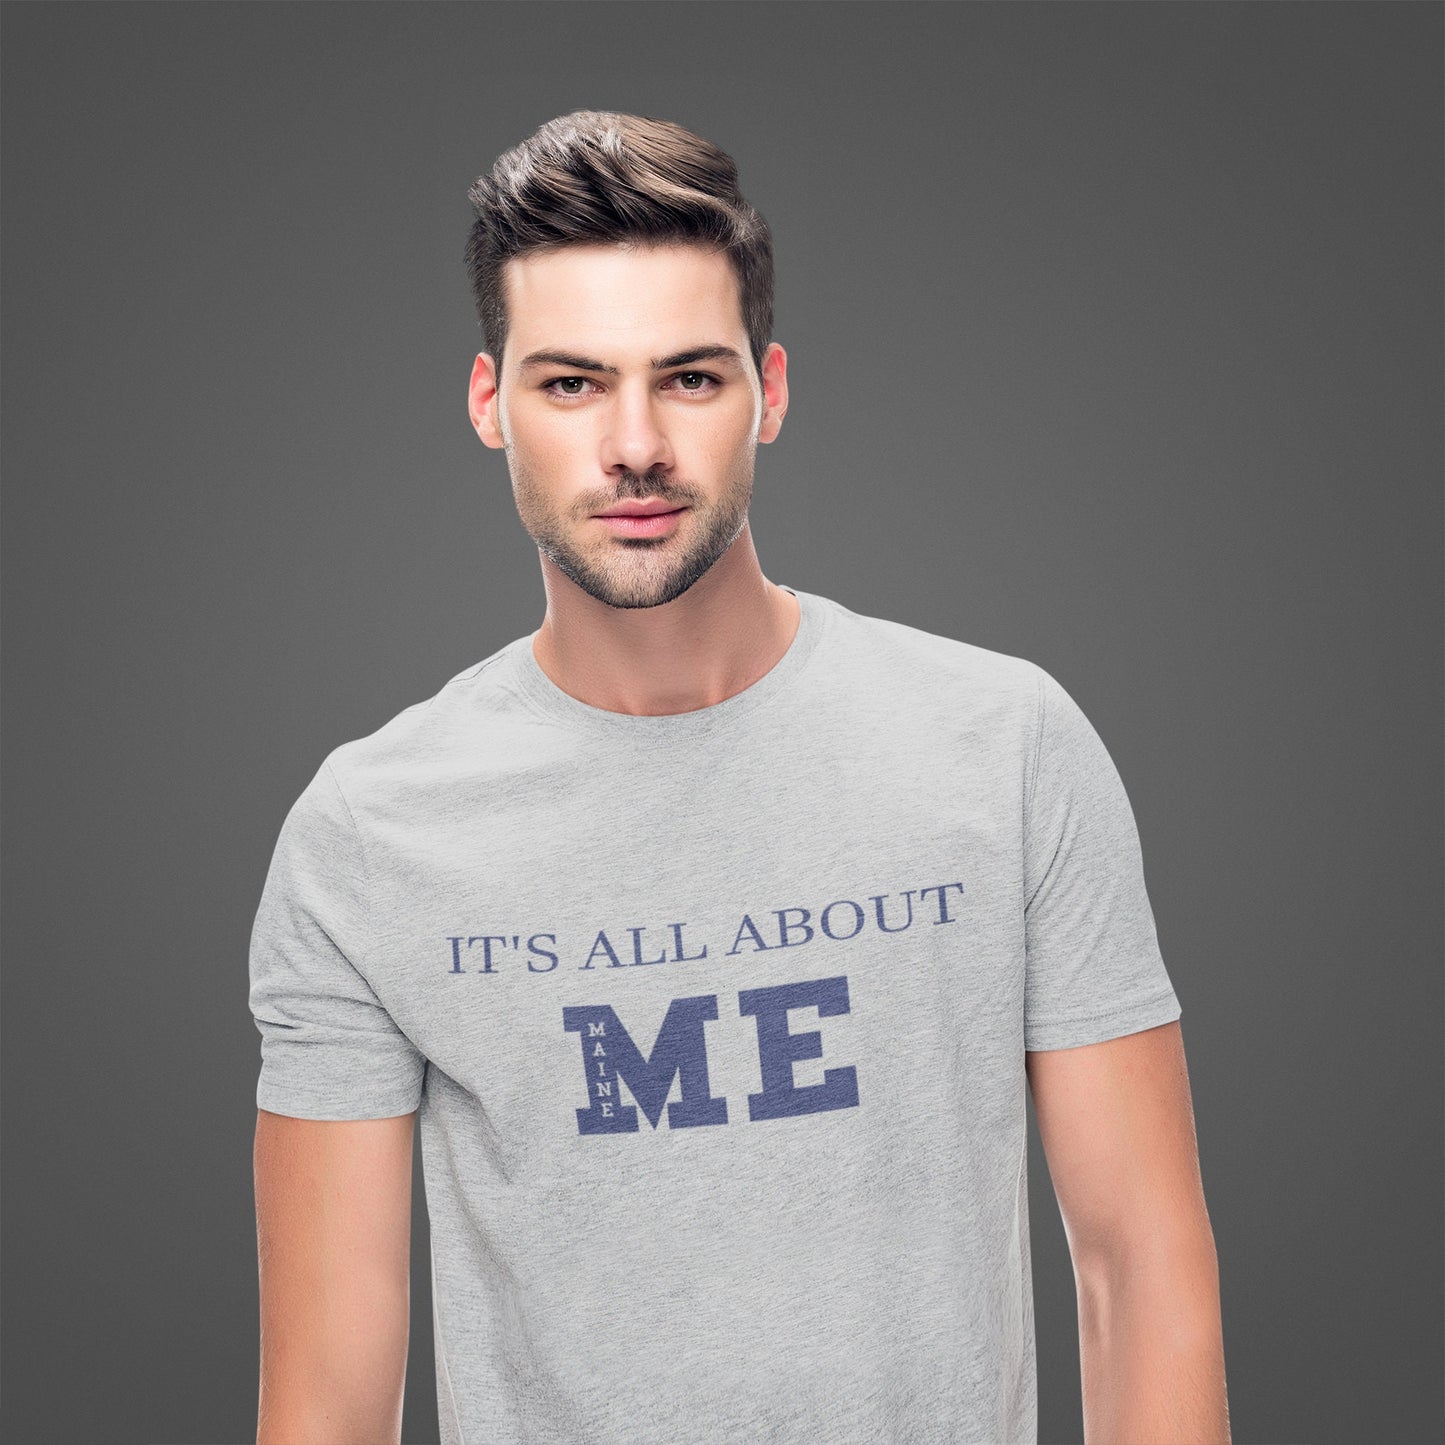 It's All About Me (Maine) t-shirt gray